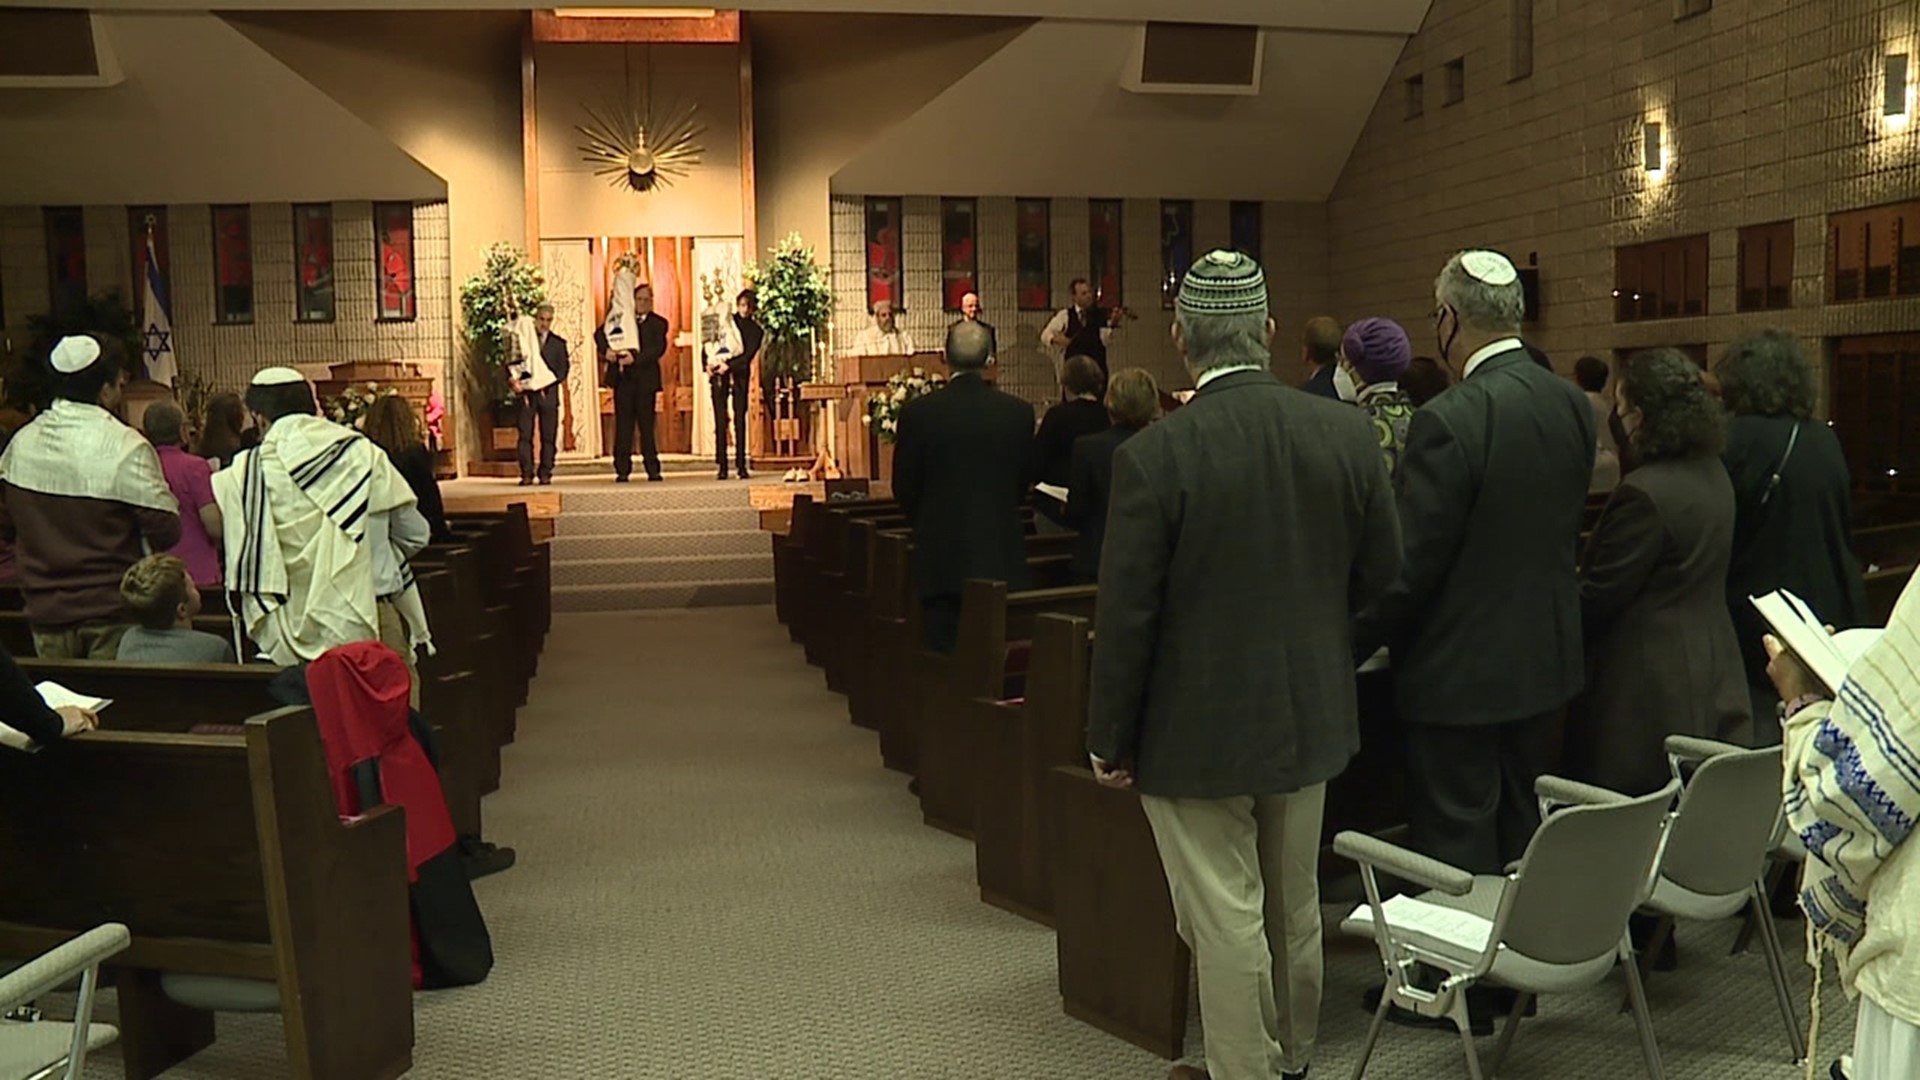 Temple Hesed in Scranton was the scene of a Yom Kippur service Tuesday night.